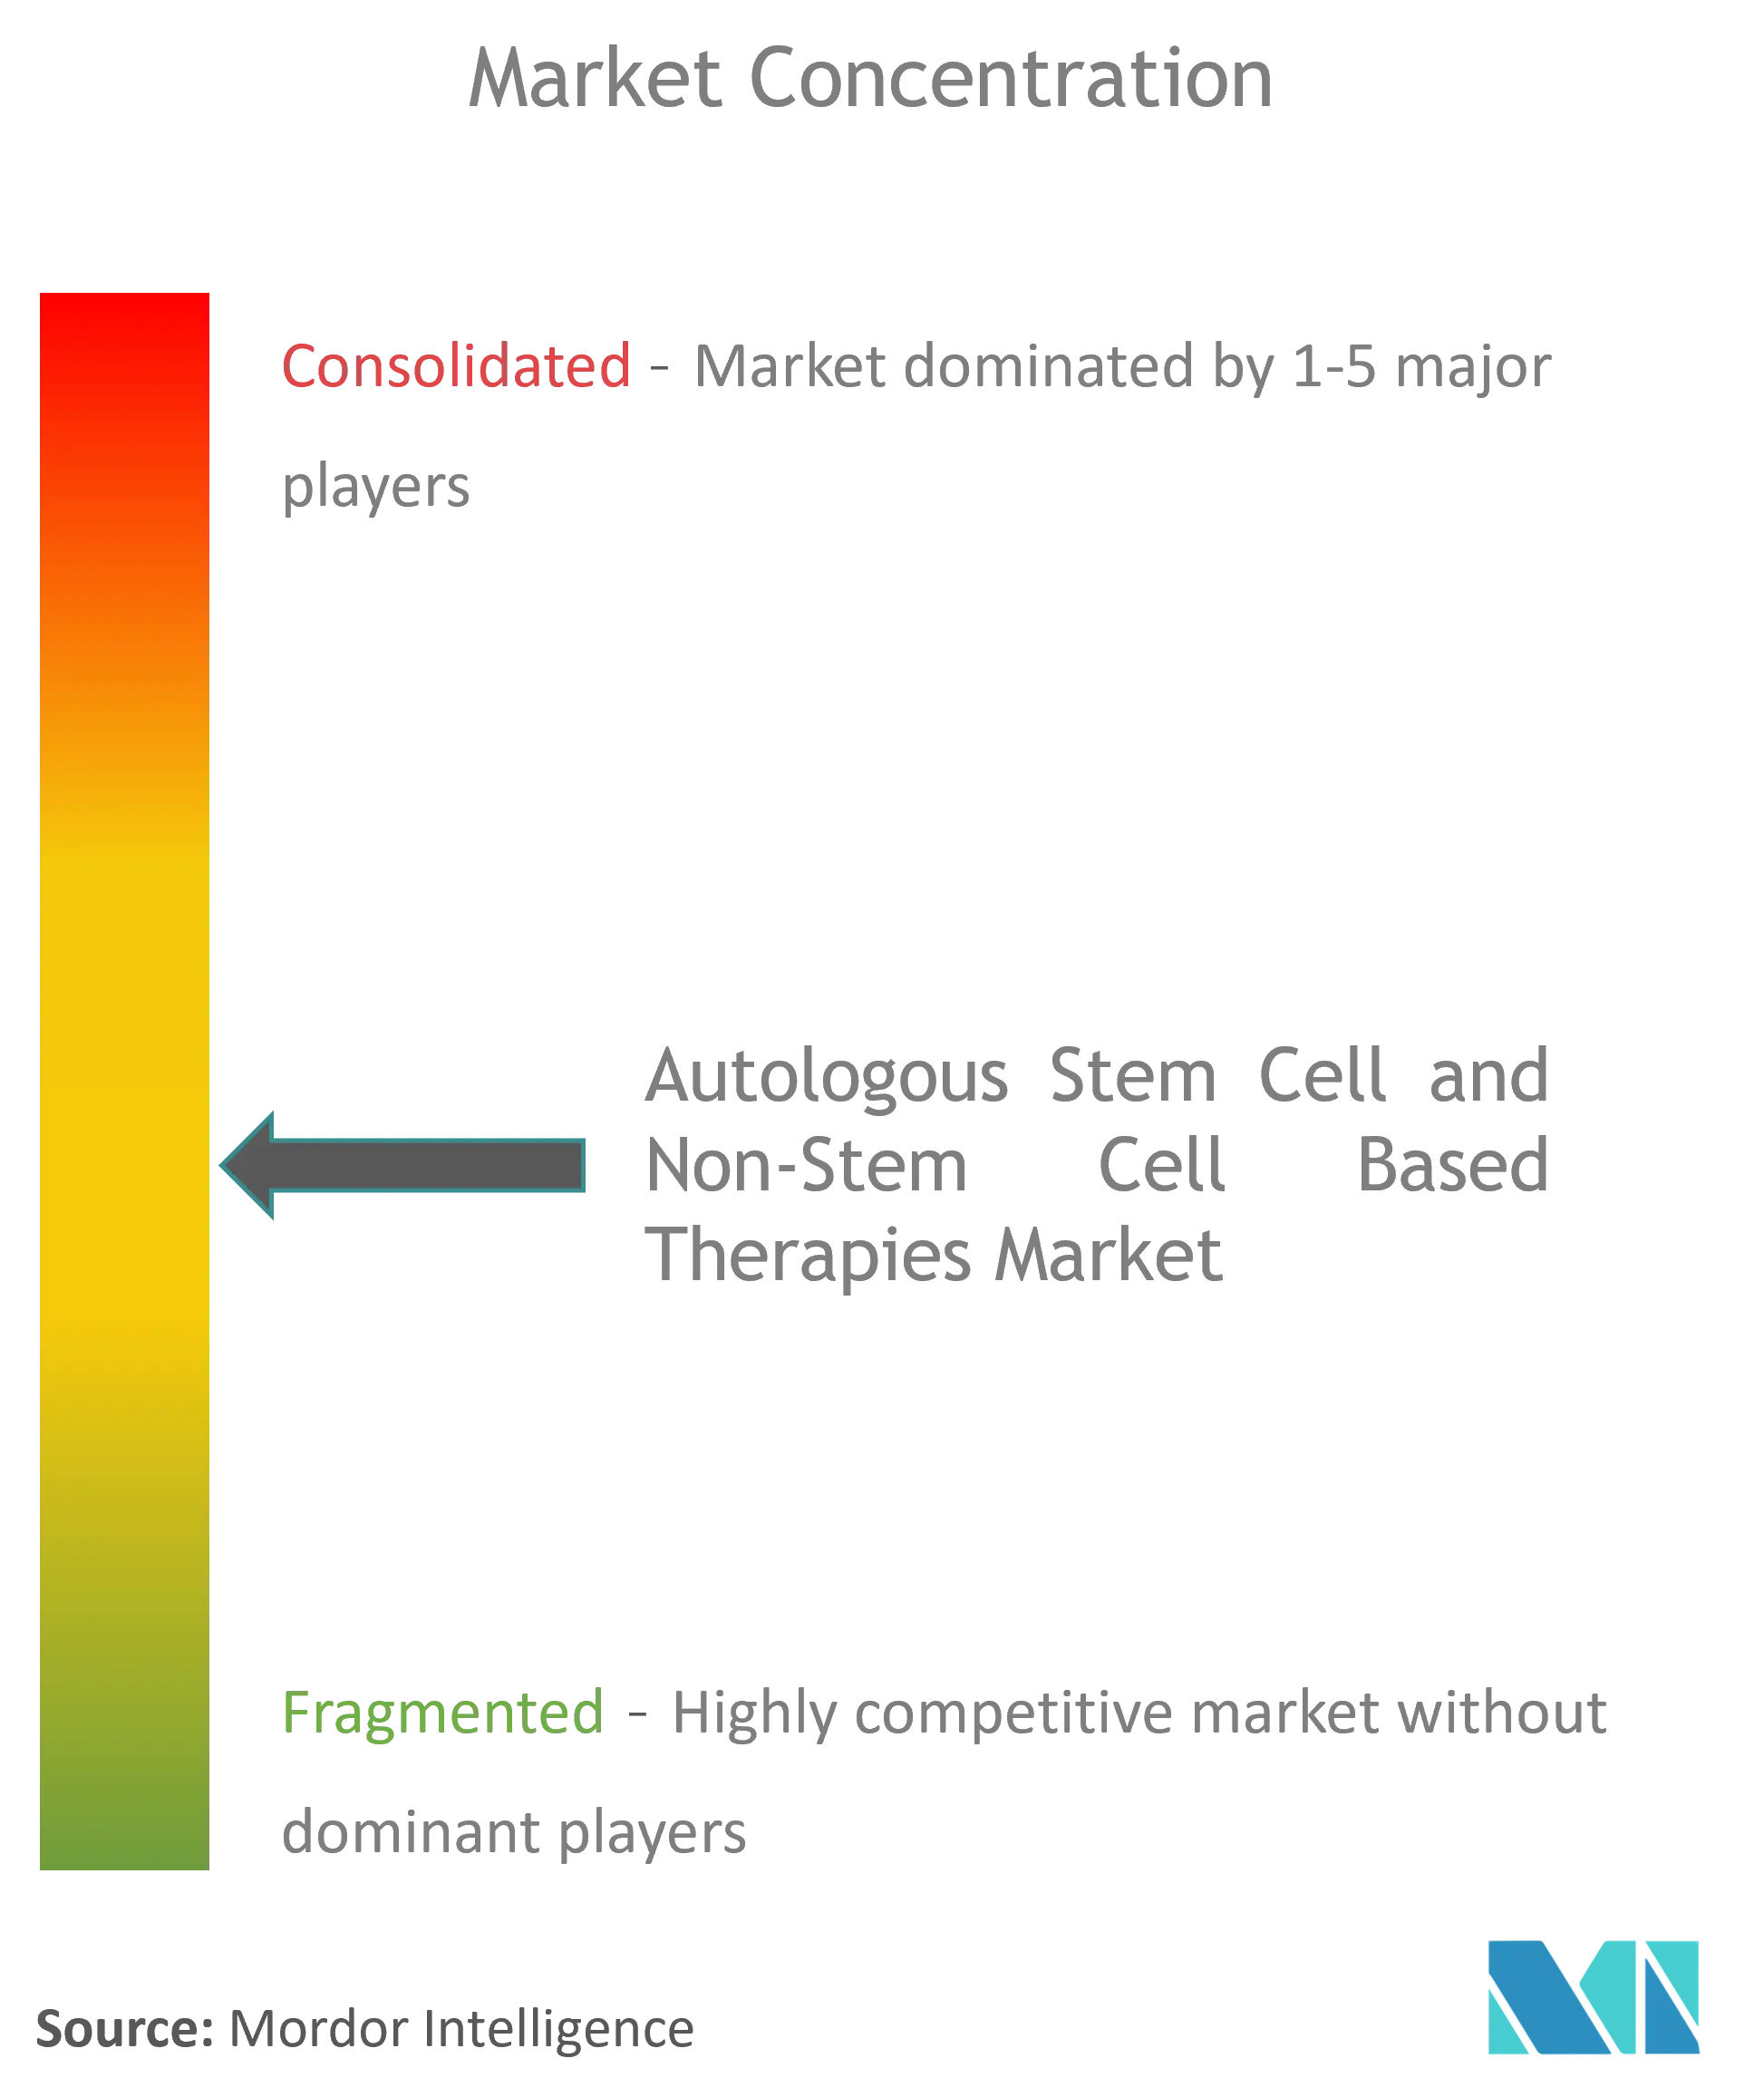 Autologous Stem Cell and Non-Stem Cell Based Therapies Market Concentration